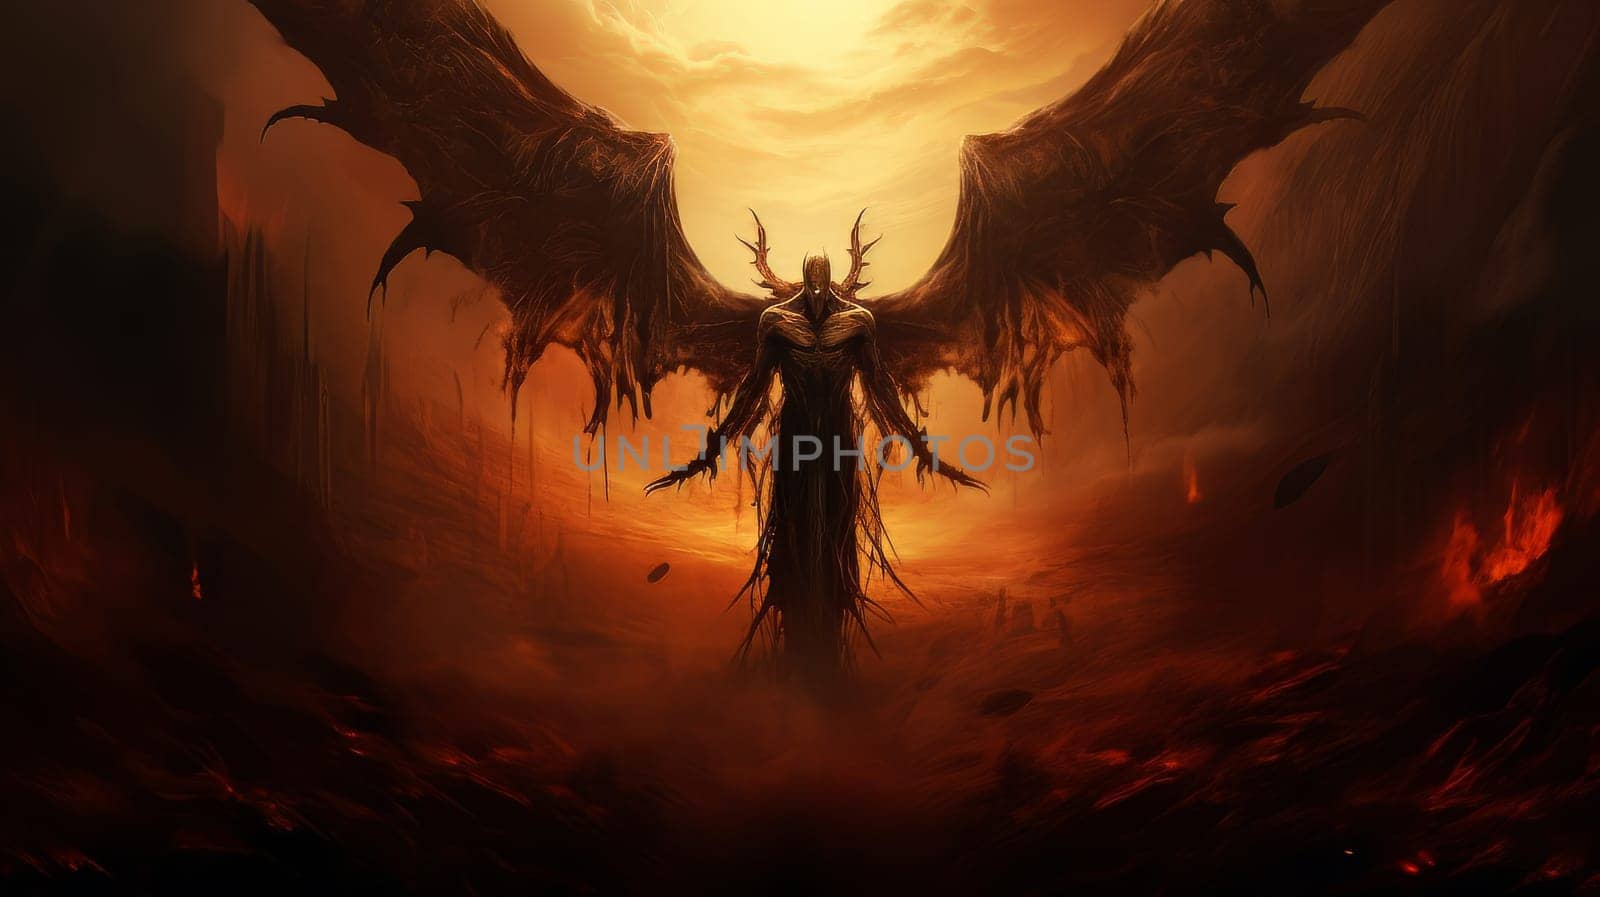 Epic creepy demon of hell, punisher of all sinners, the enemy of God. Apocalypse, Halloween, horror story, AI